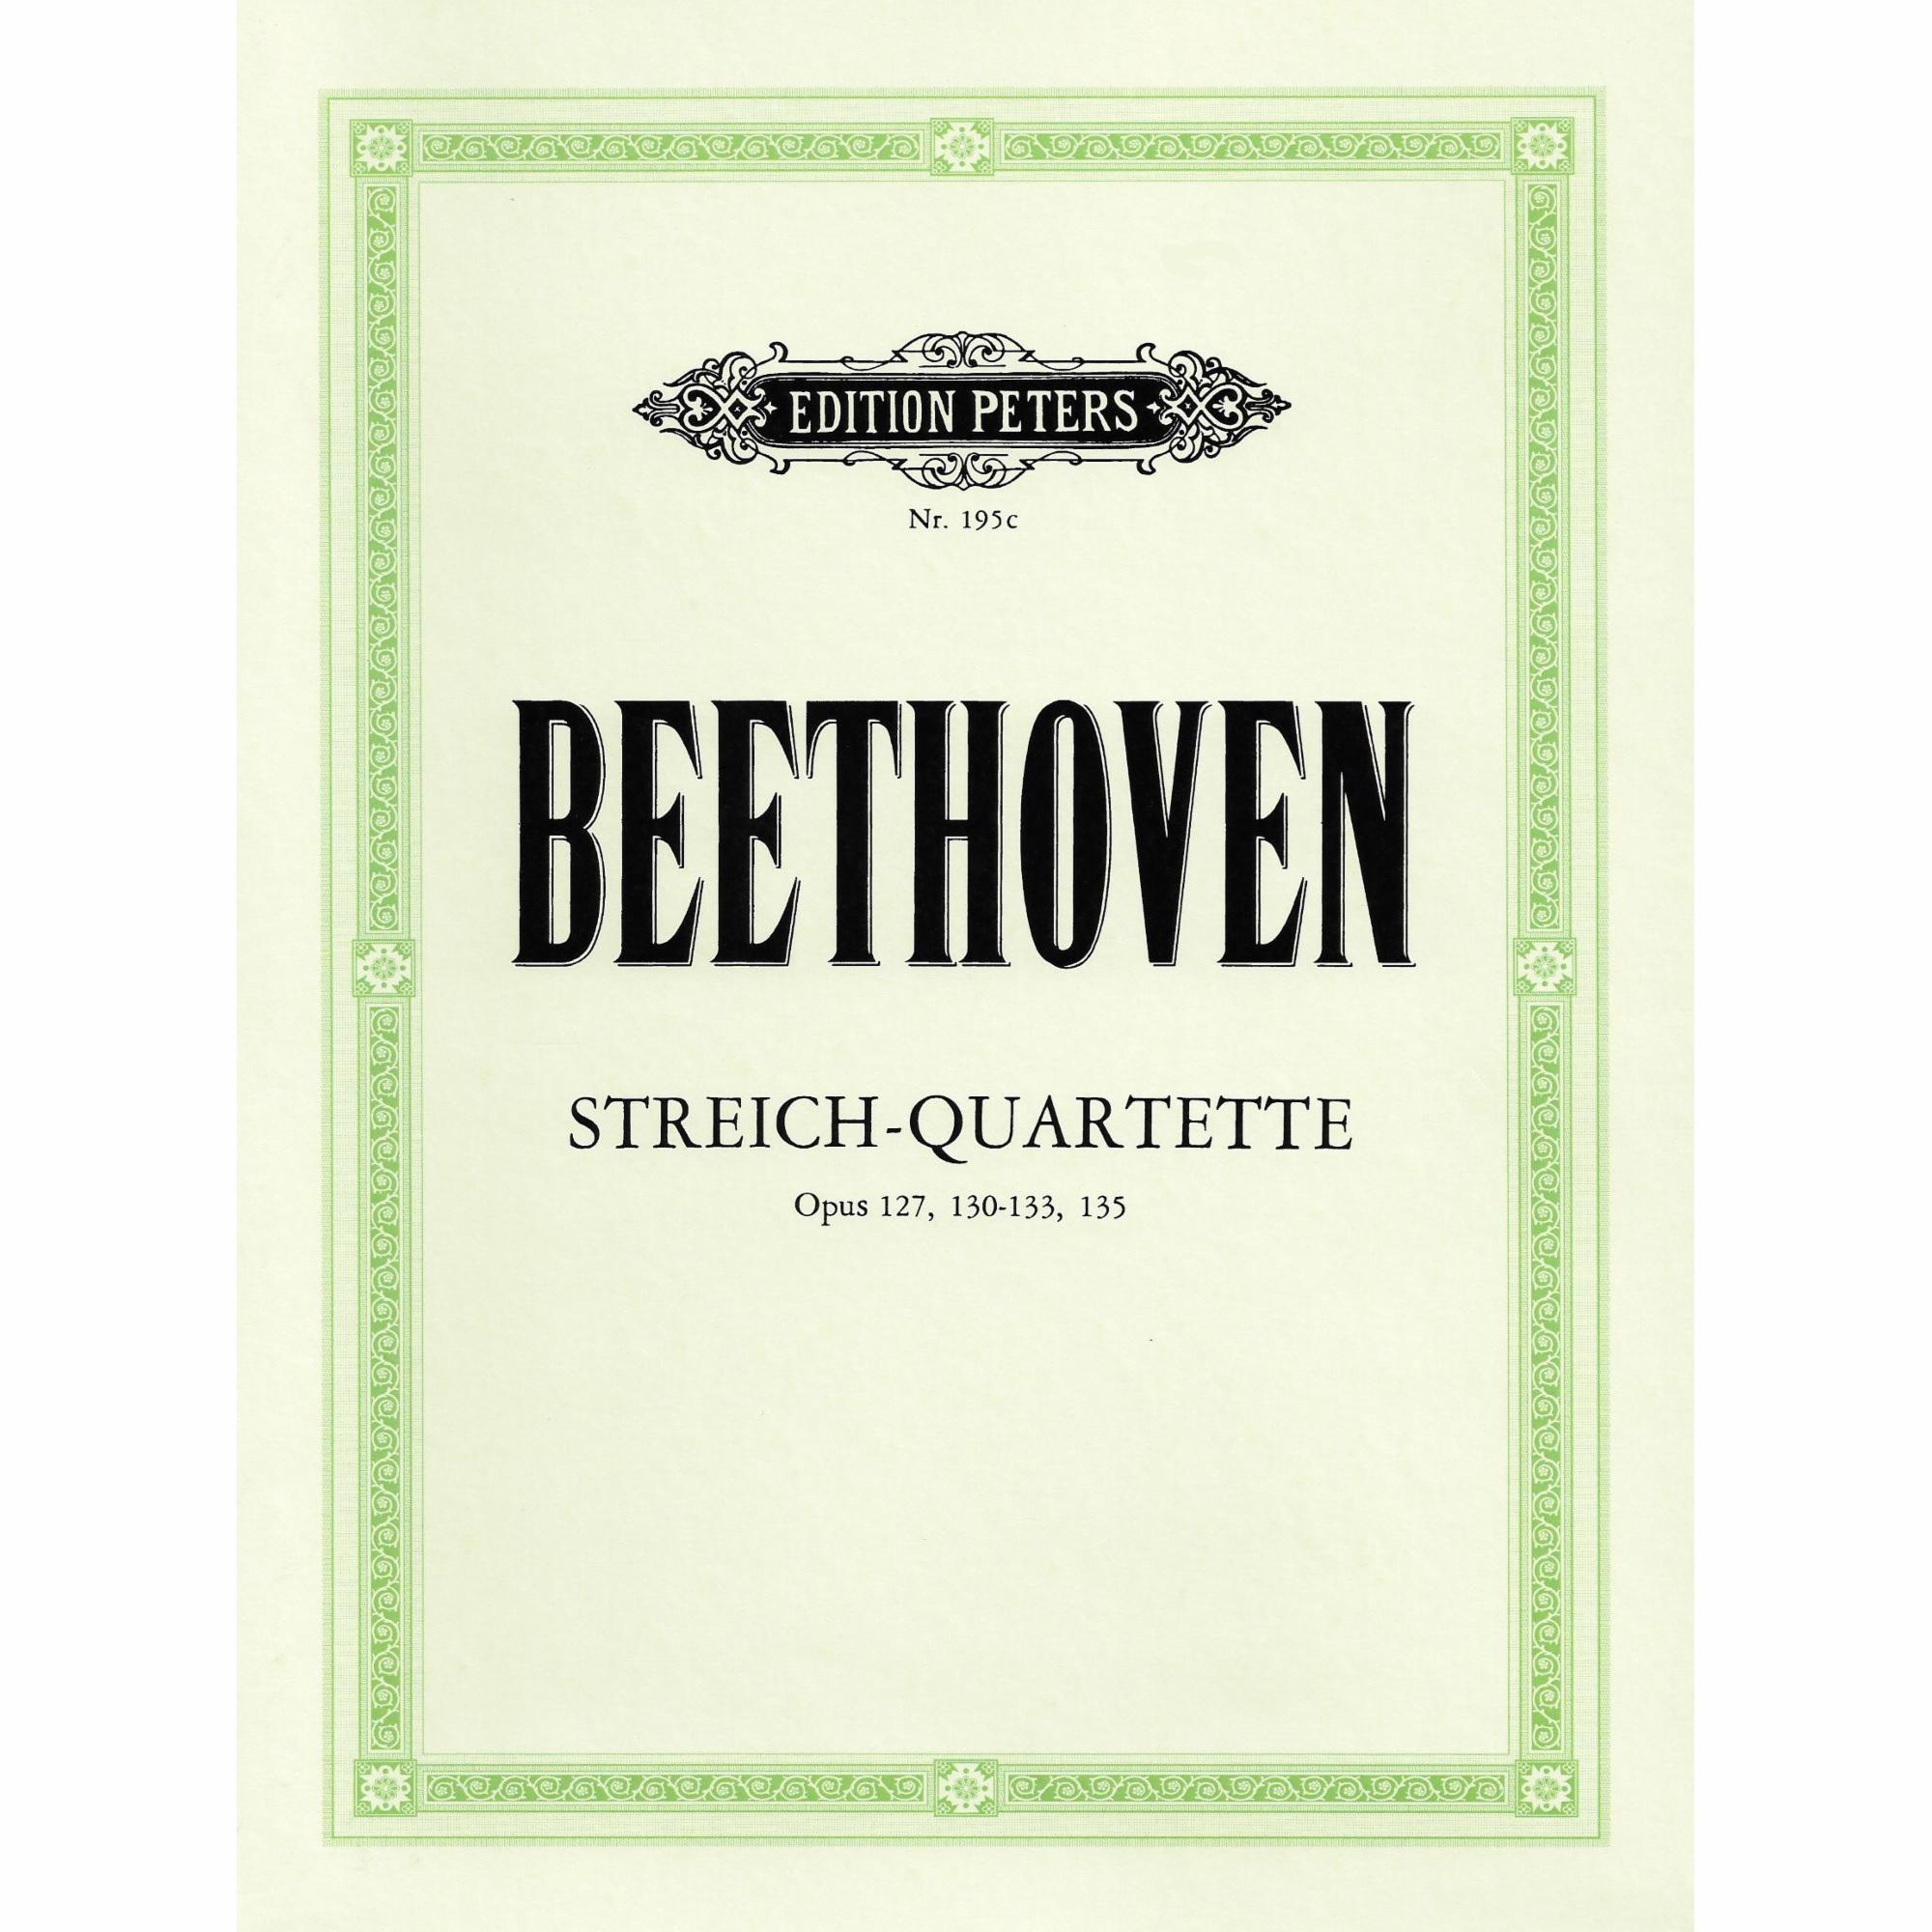 Beethoven -- String Quartets, Opp. 127, 130-133, and 135